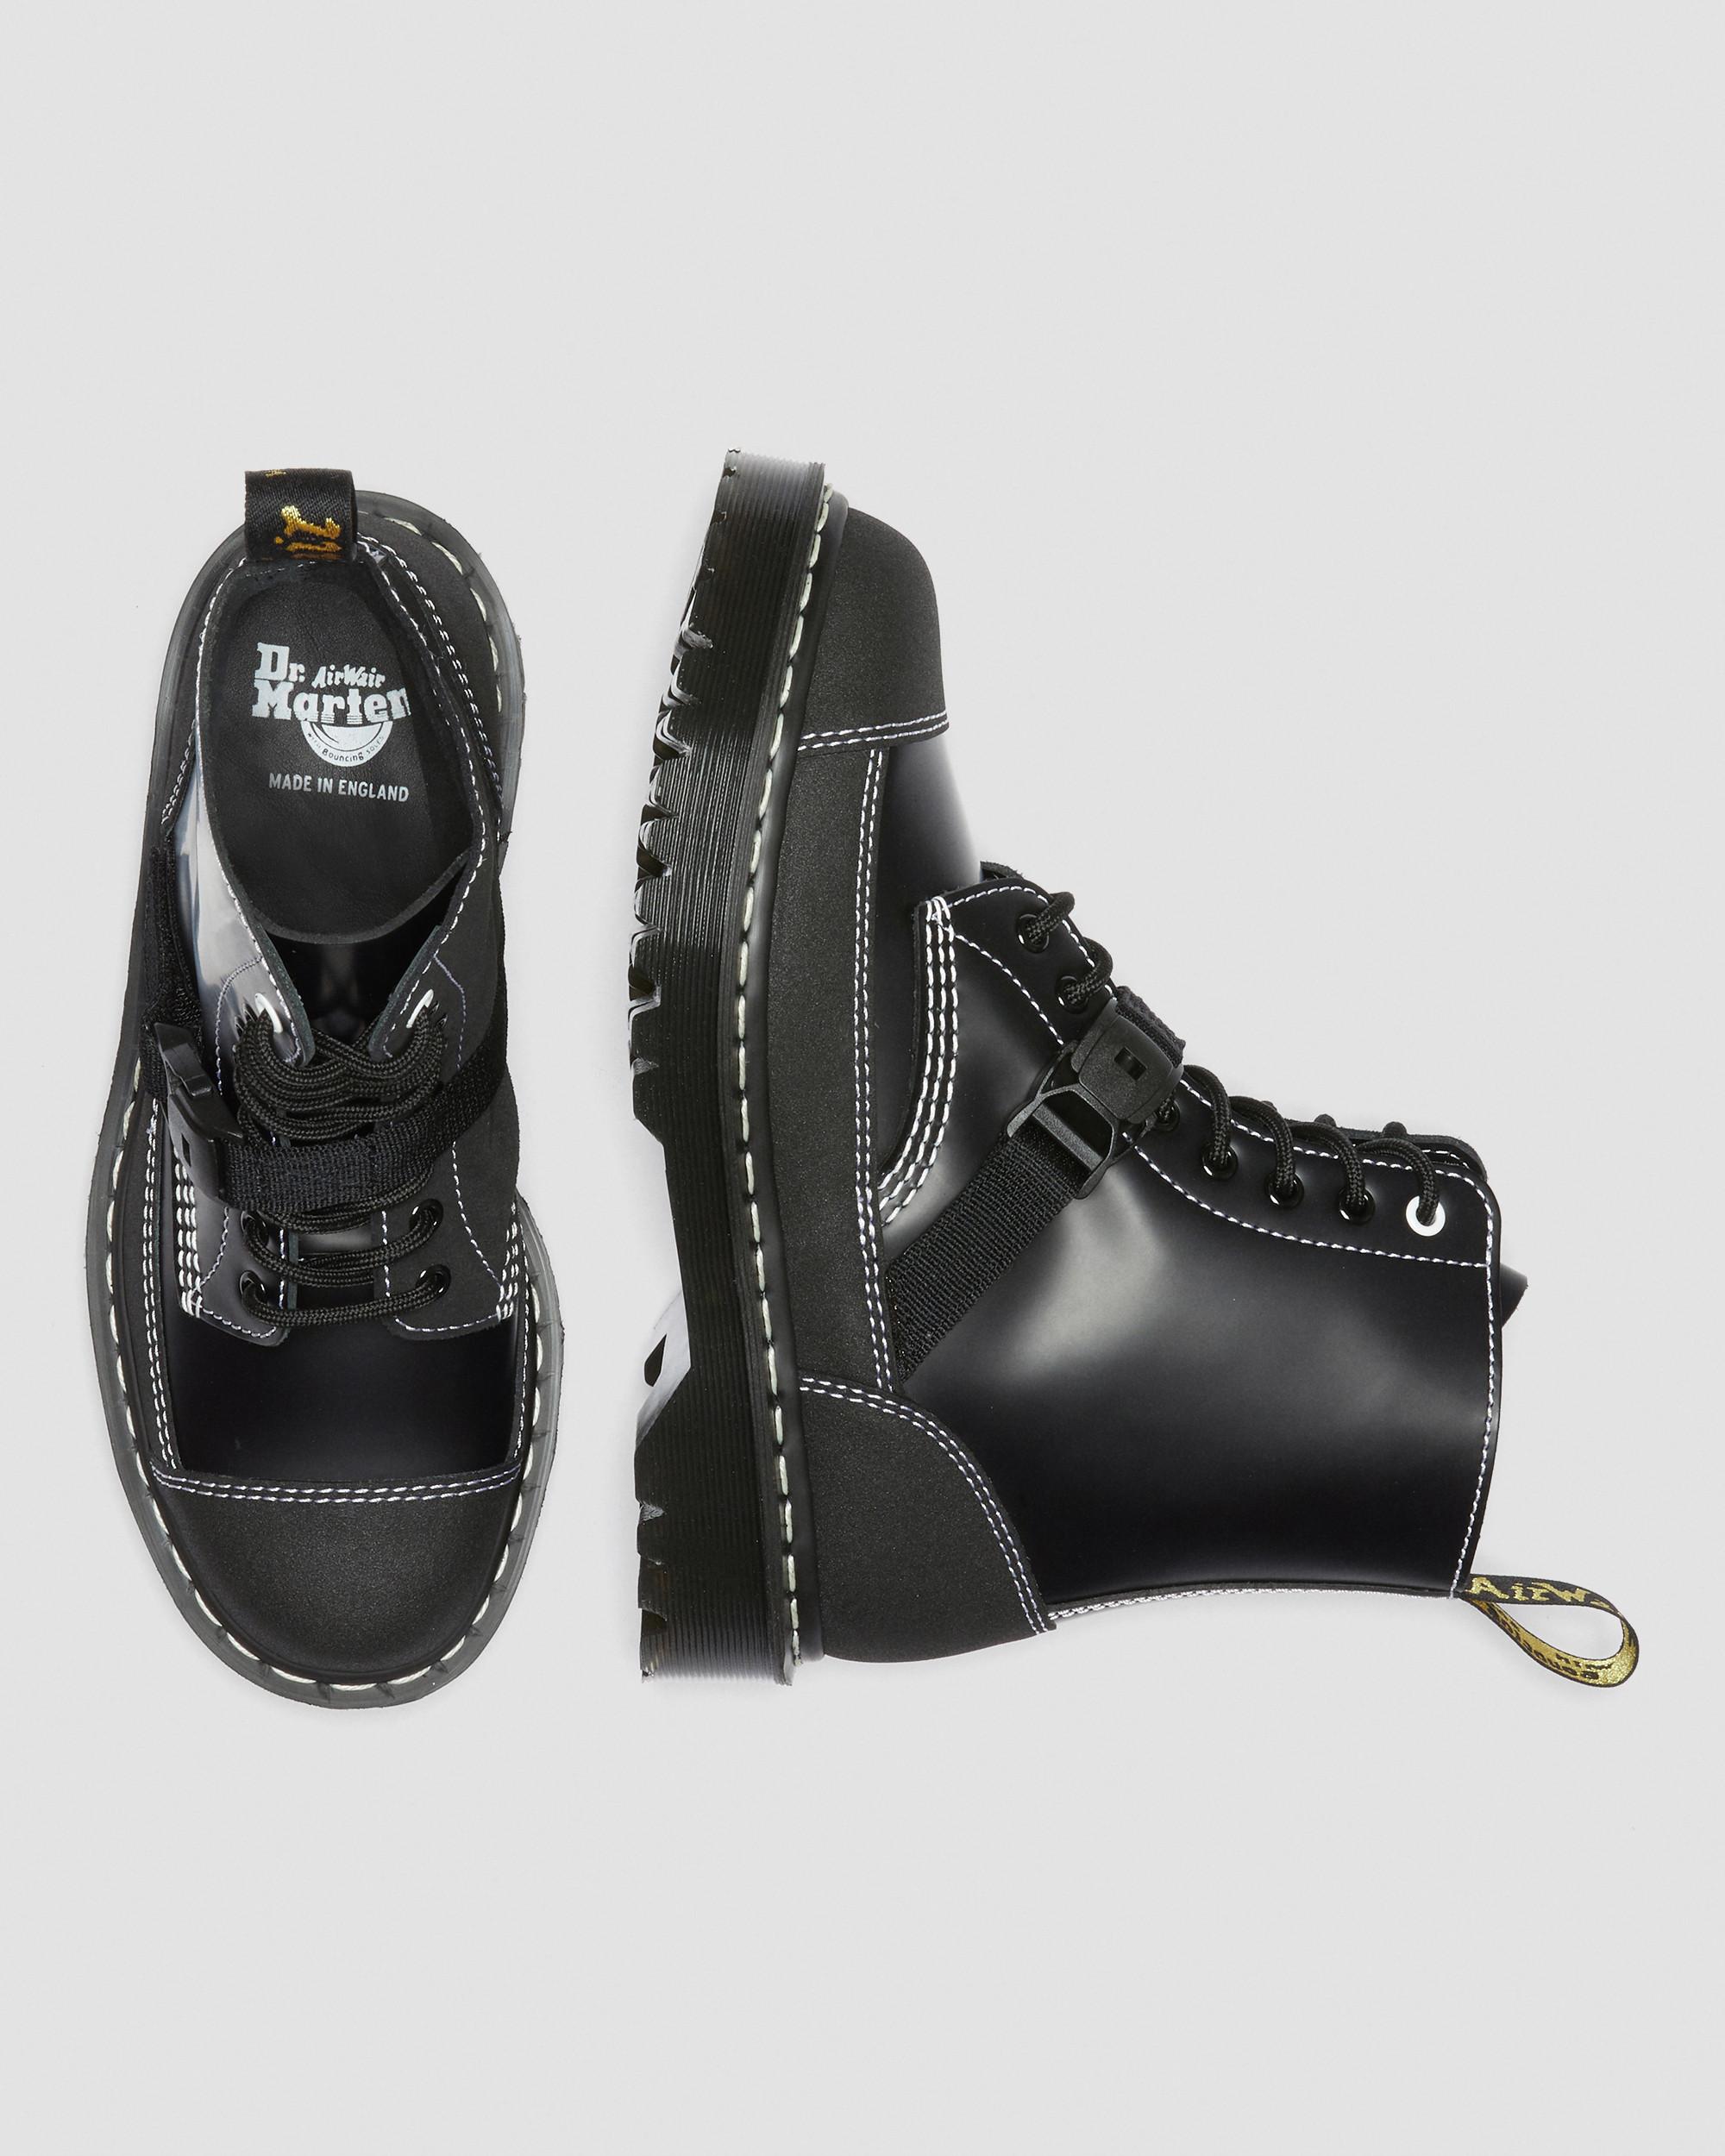 DR MARTENS 1460 Tech Made in England Leather Lace Up Boots